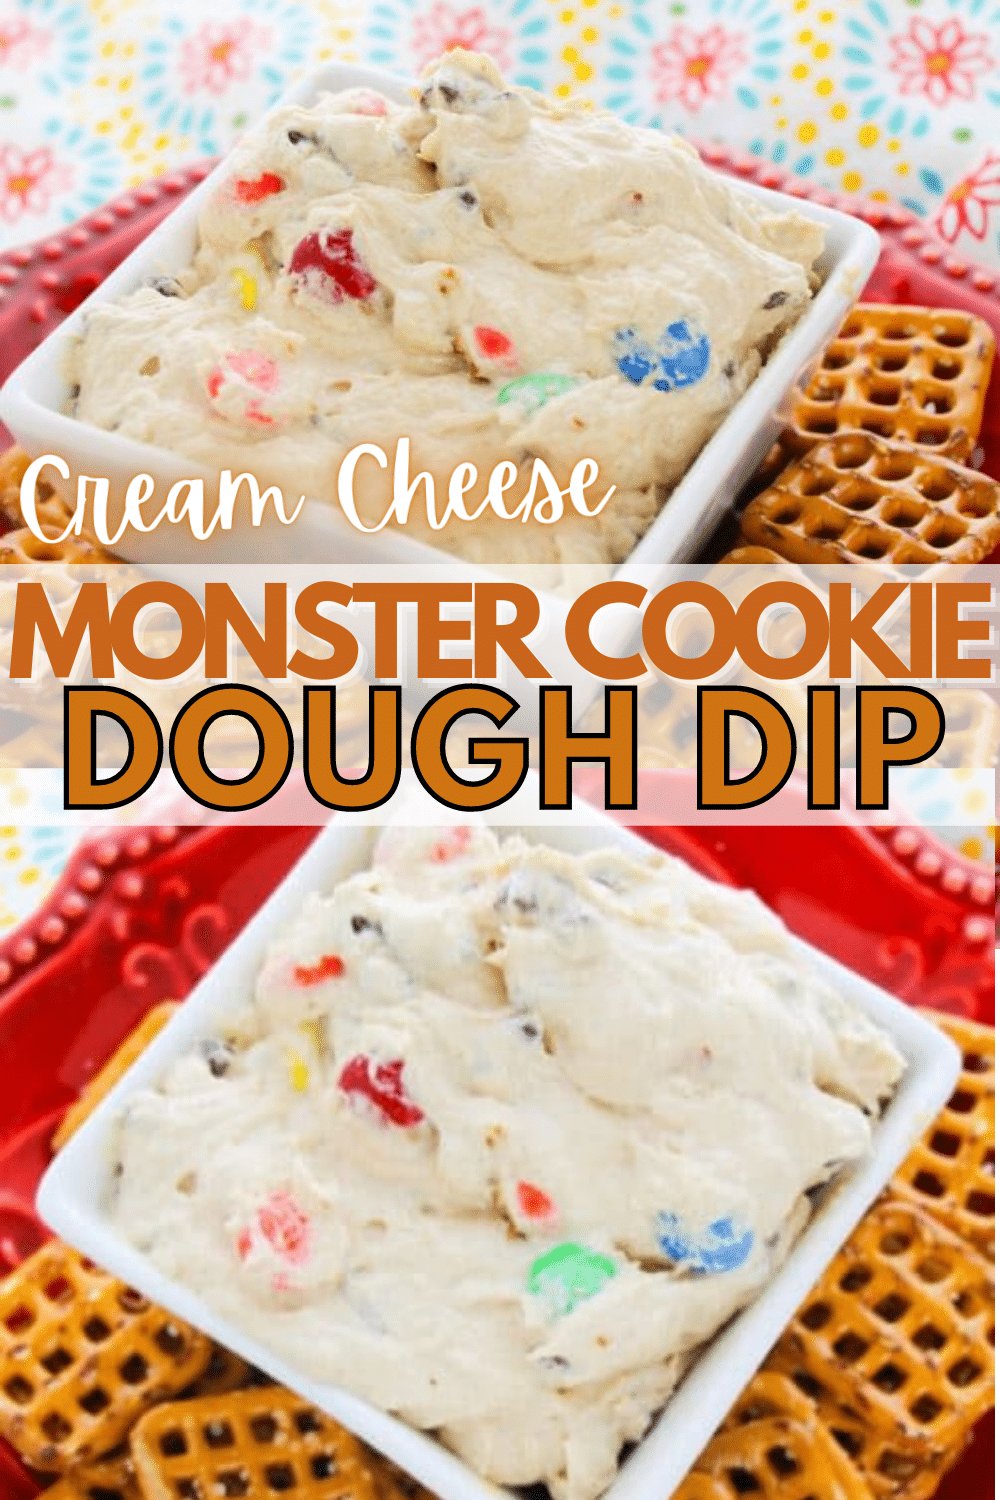 Cream cheese monster cookie dough dip is a scrumptious and indulgent treat perfect for any occasion. This creamy and decadent dip combines the creamy goodness of cream cheese with the irresistible taste of homemade monster